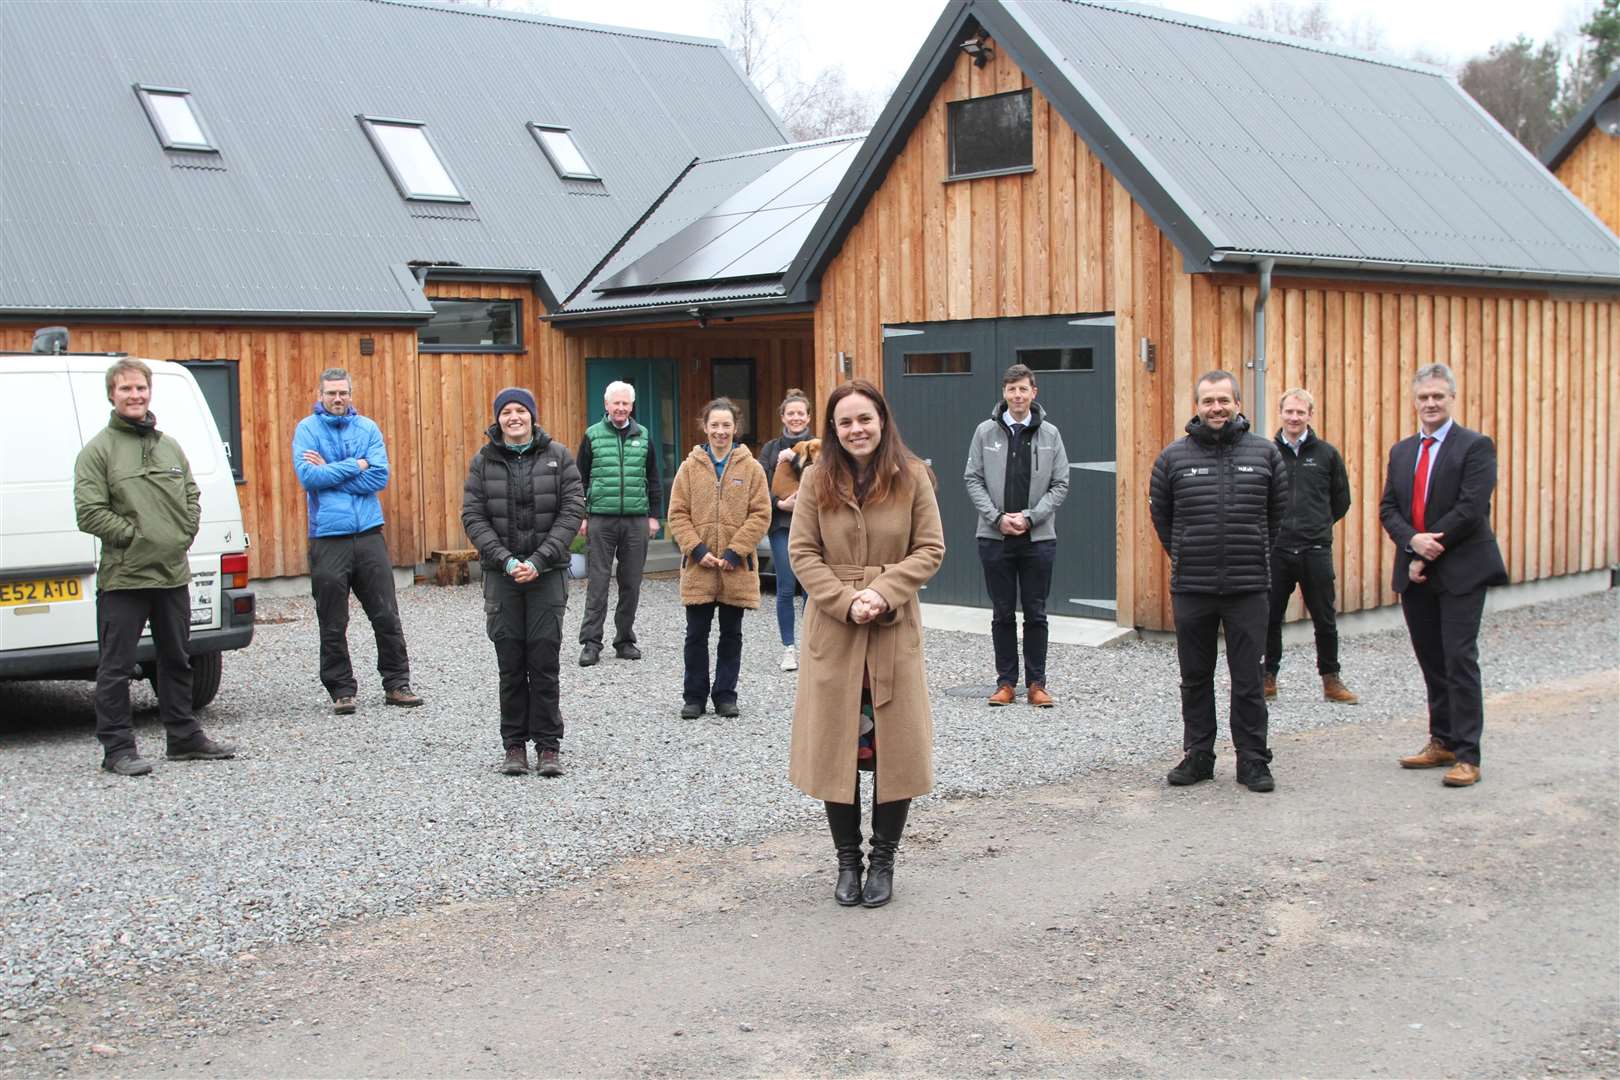 Some of those who took part in the summit including Kate Forbes MSP (centre) at the Old Sawmill development at Inverdruie which was visited after the conference.